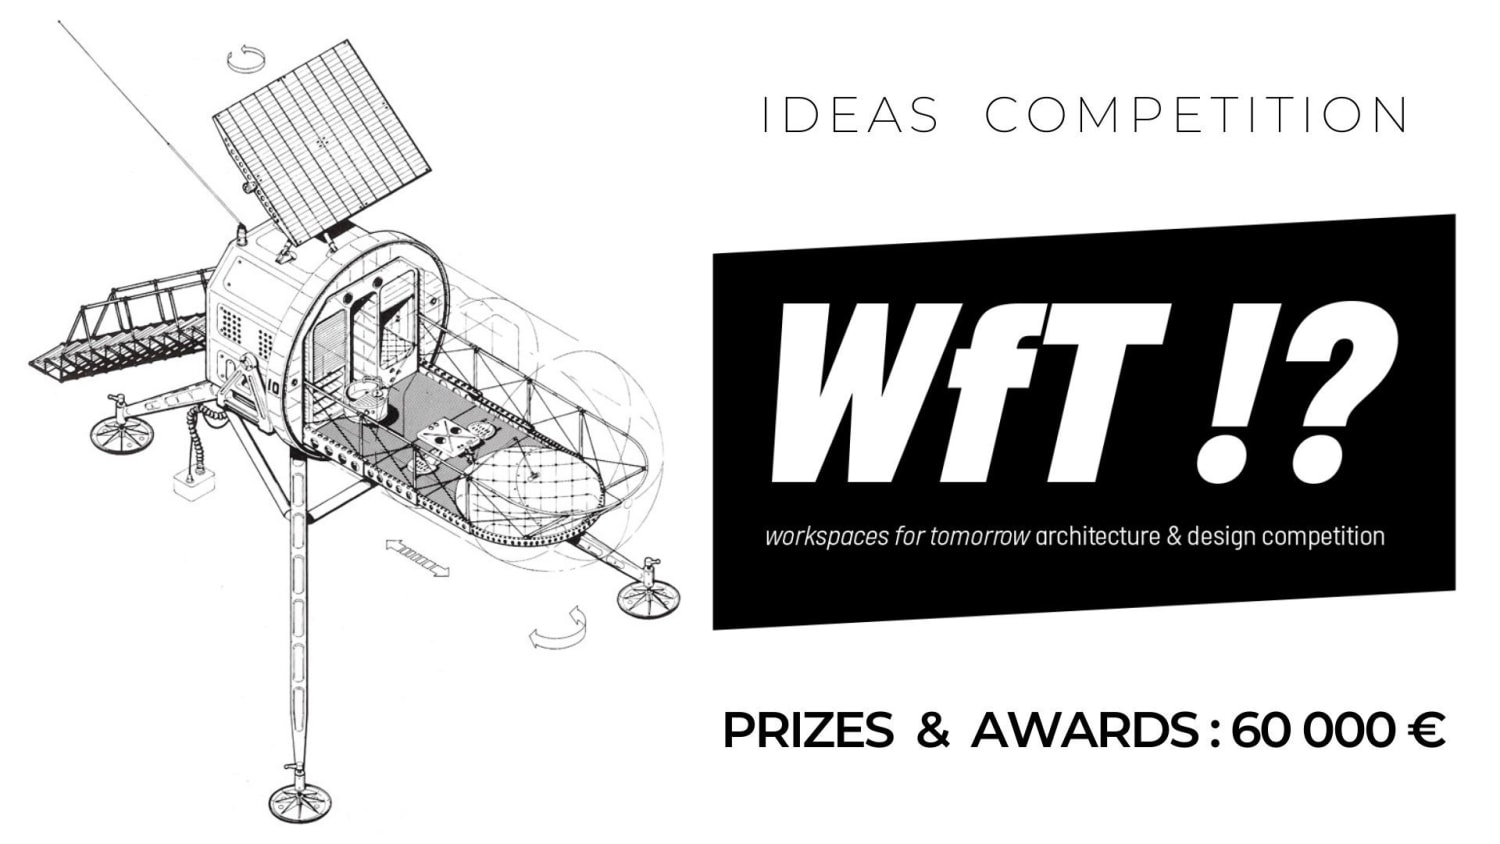 Open Call for Ideas: Workplaces for Tomorrow